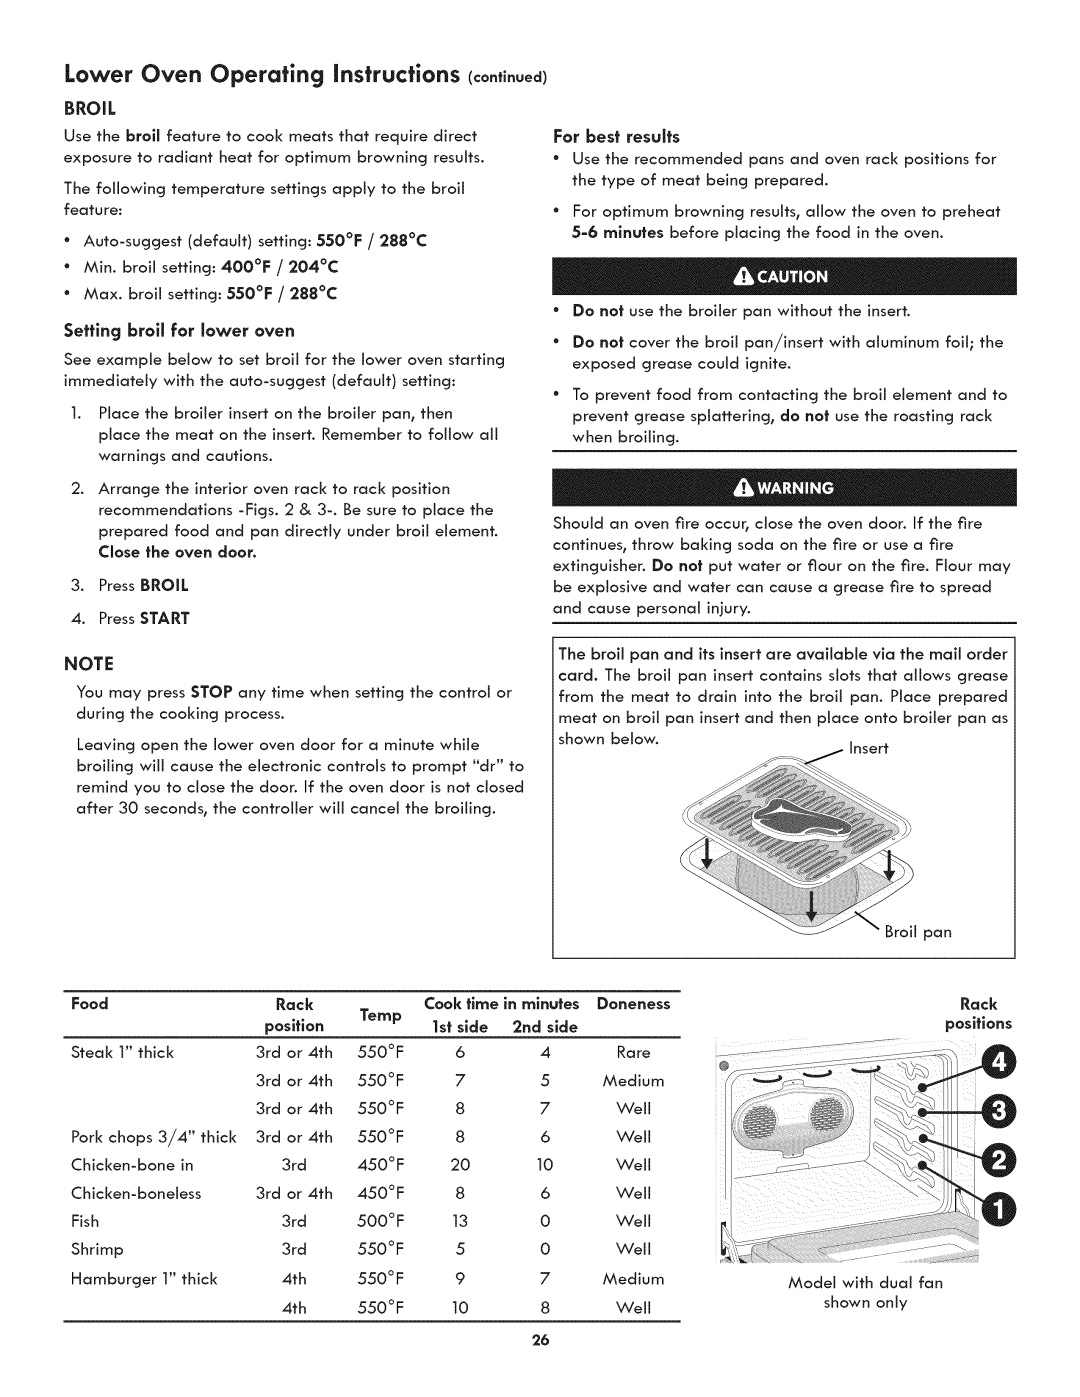 Kenmore 790.489 Lower Oven Operating instructions continued, Setting broil for lower oven, Food, Cook time, in minutes 